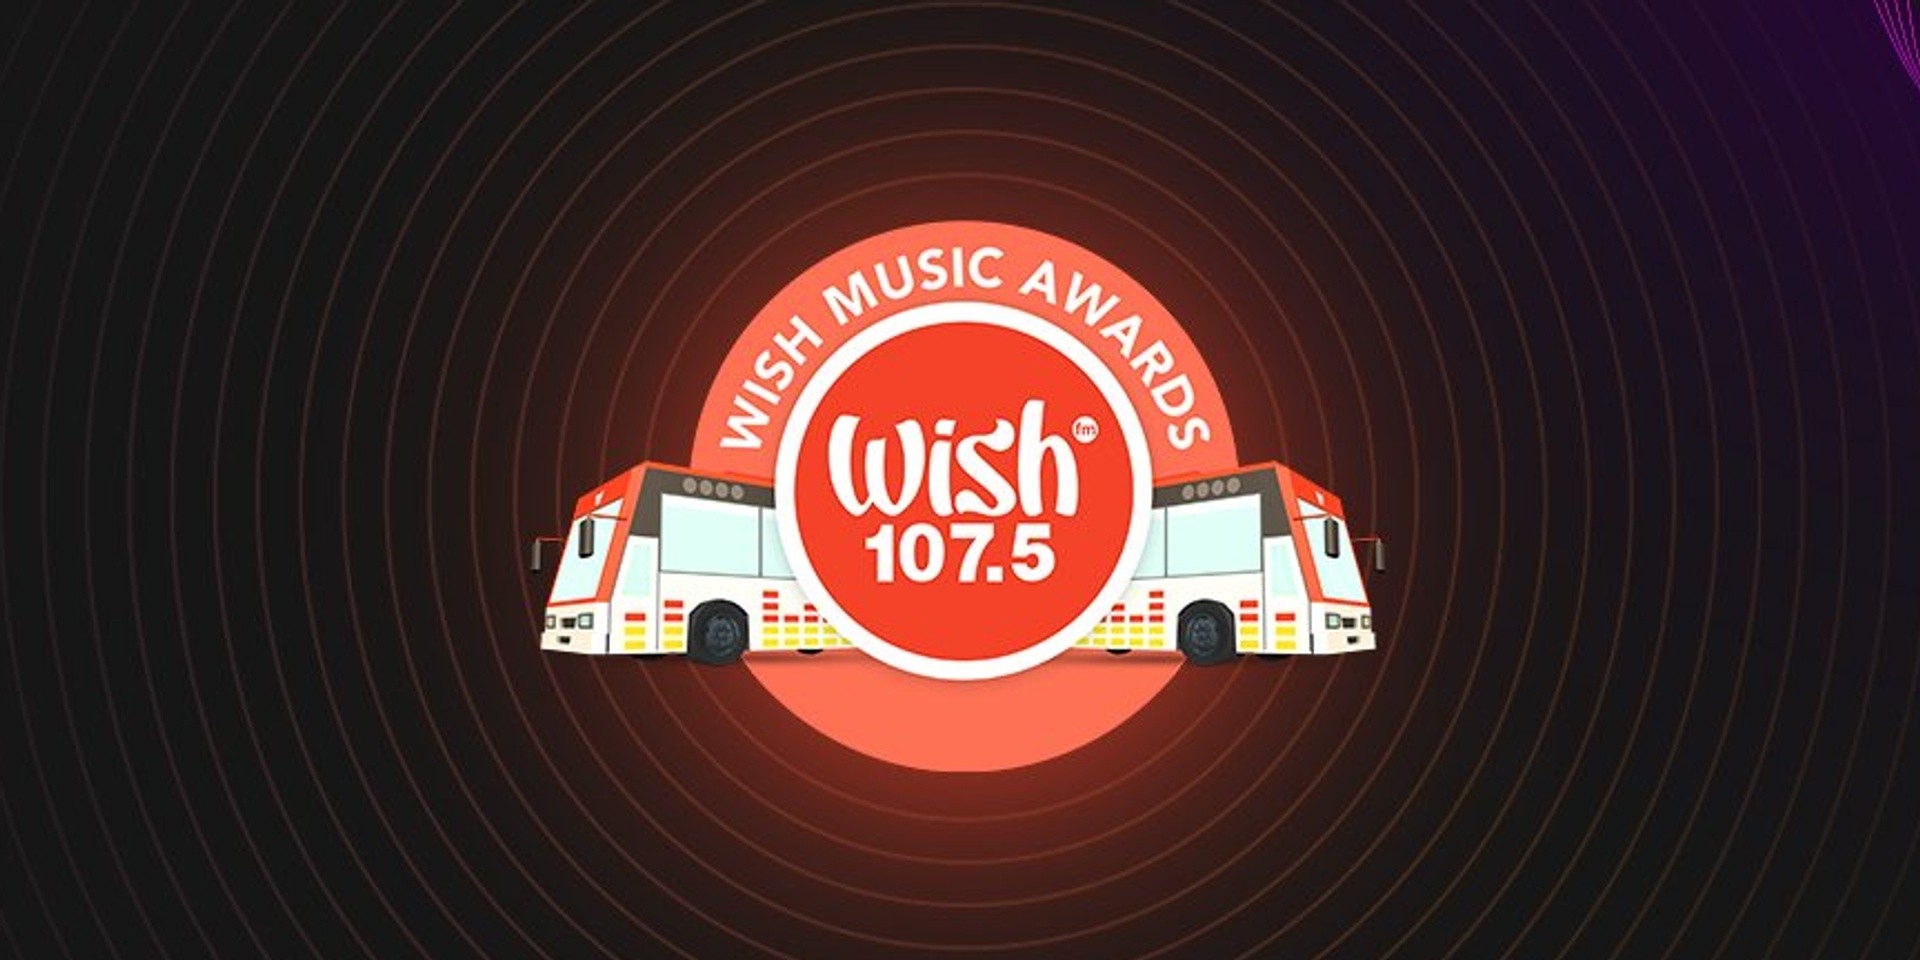 Here are the winners of the 6th Wish Music Awards – SB19, Ben&Ben, ZILD, Gloc-9, Unique, and more